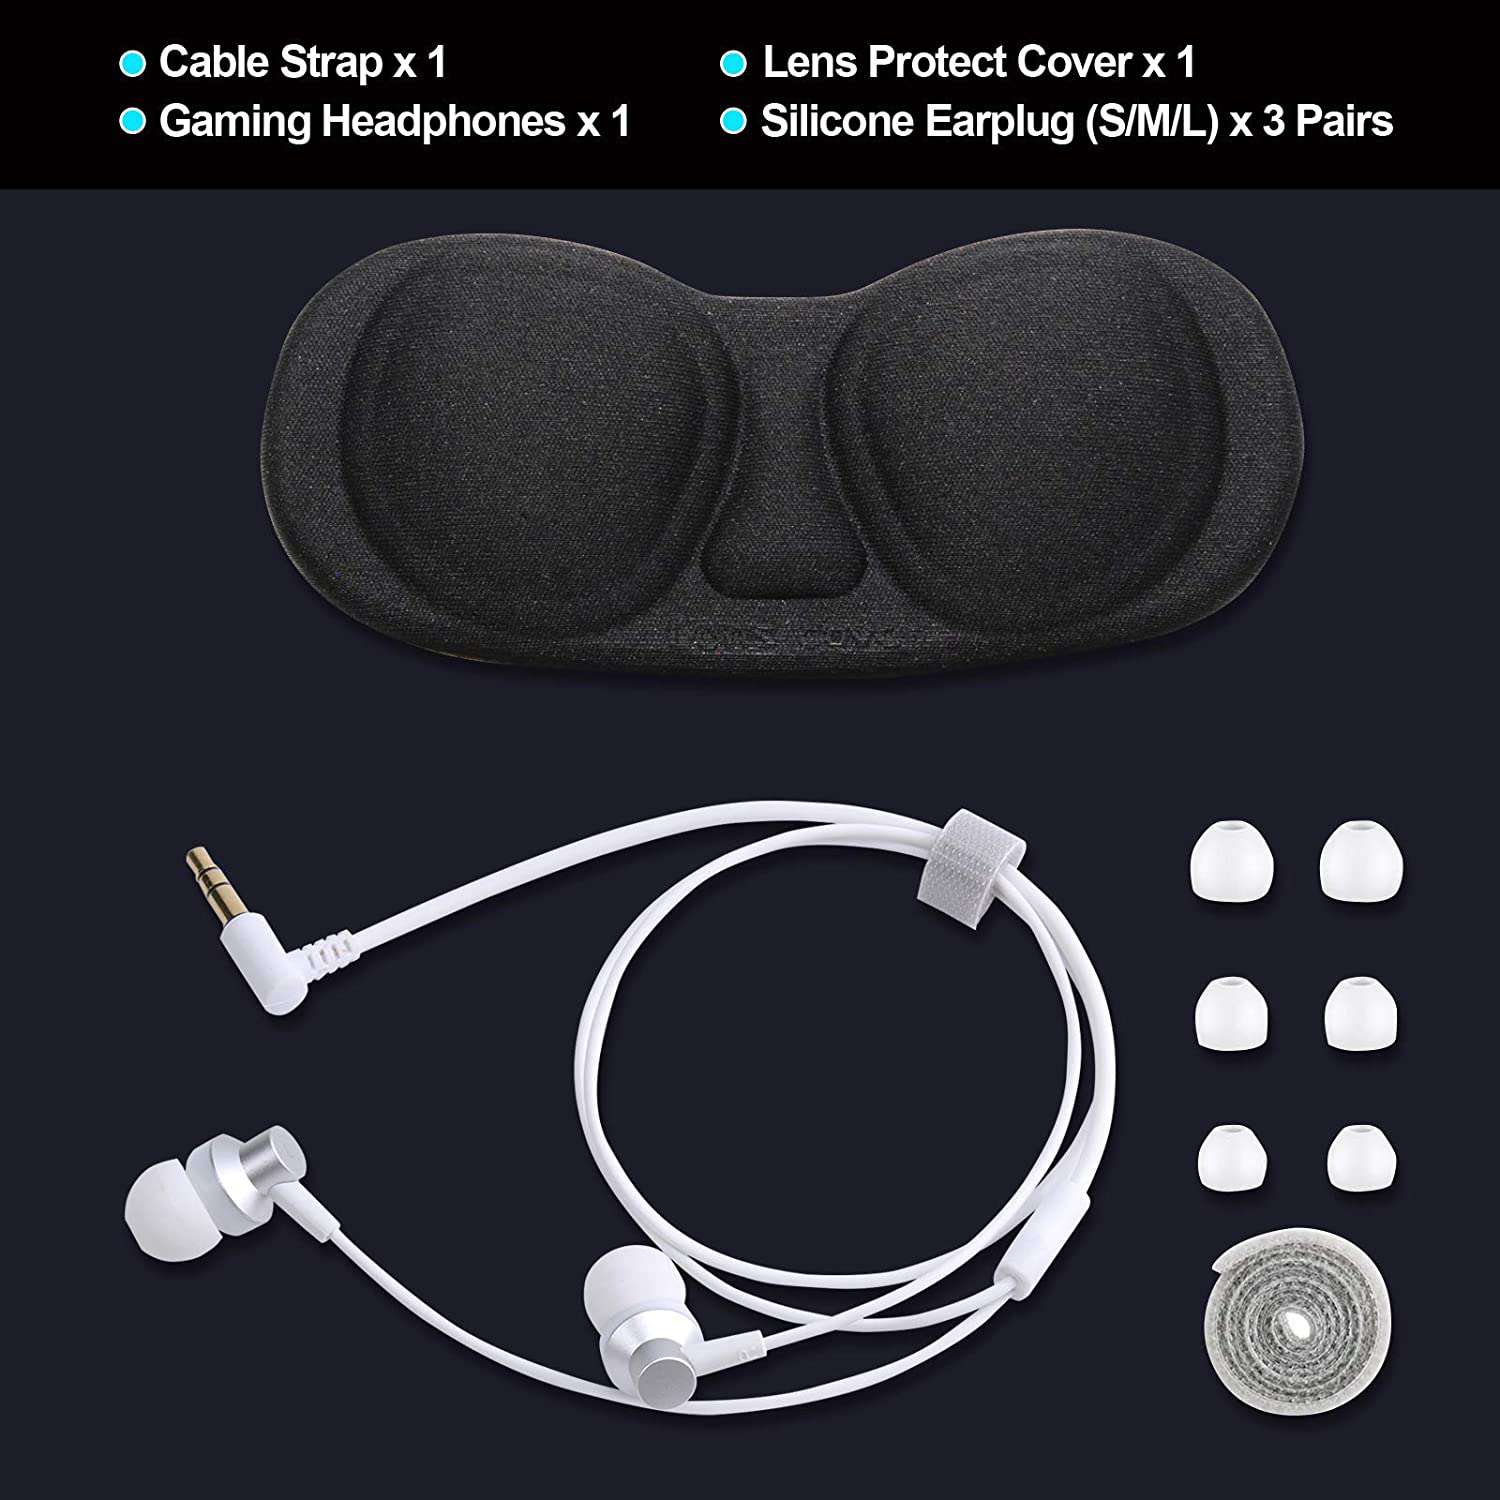 Get a gaming headset, 3 ear tips, Velcro strap, and VR eye cushion with your purchase.